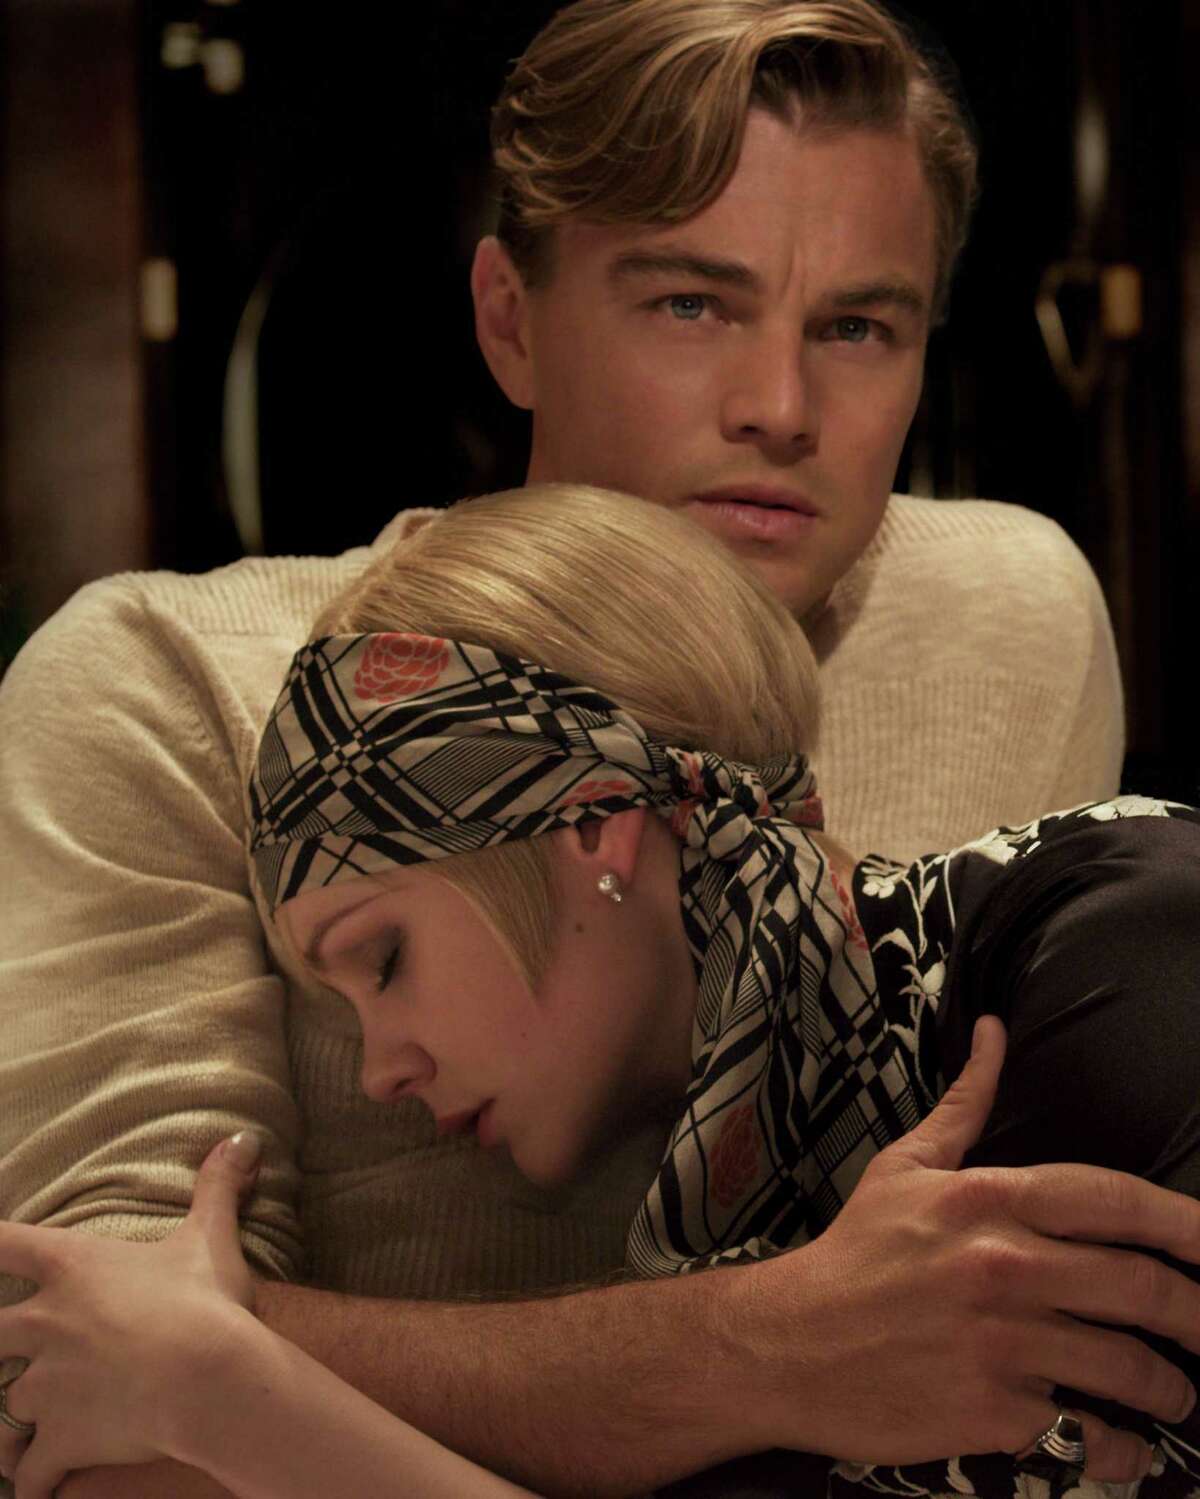 Baz Luhrmann's "The Great Gatsby," starring Leonardo DiCaprio and Carey Mulligan, will not be released until summer 2013.